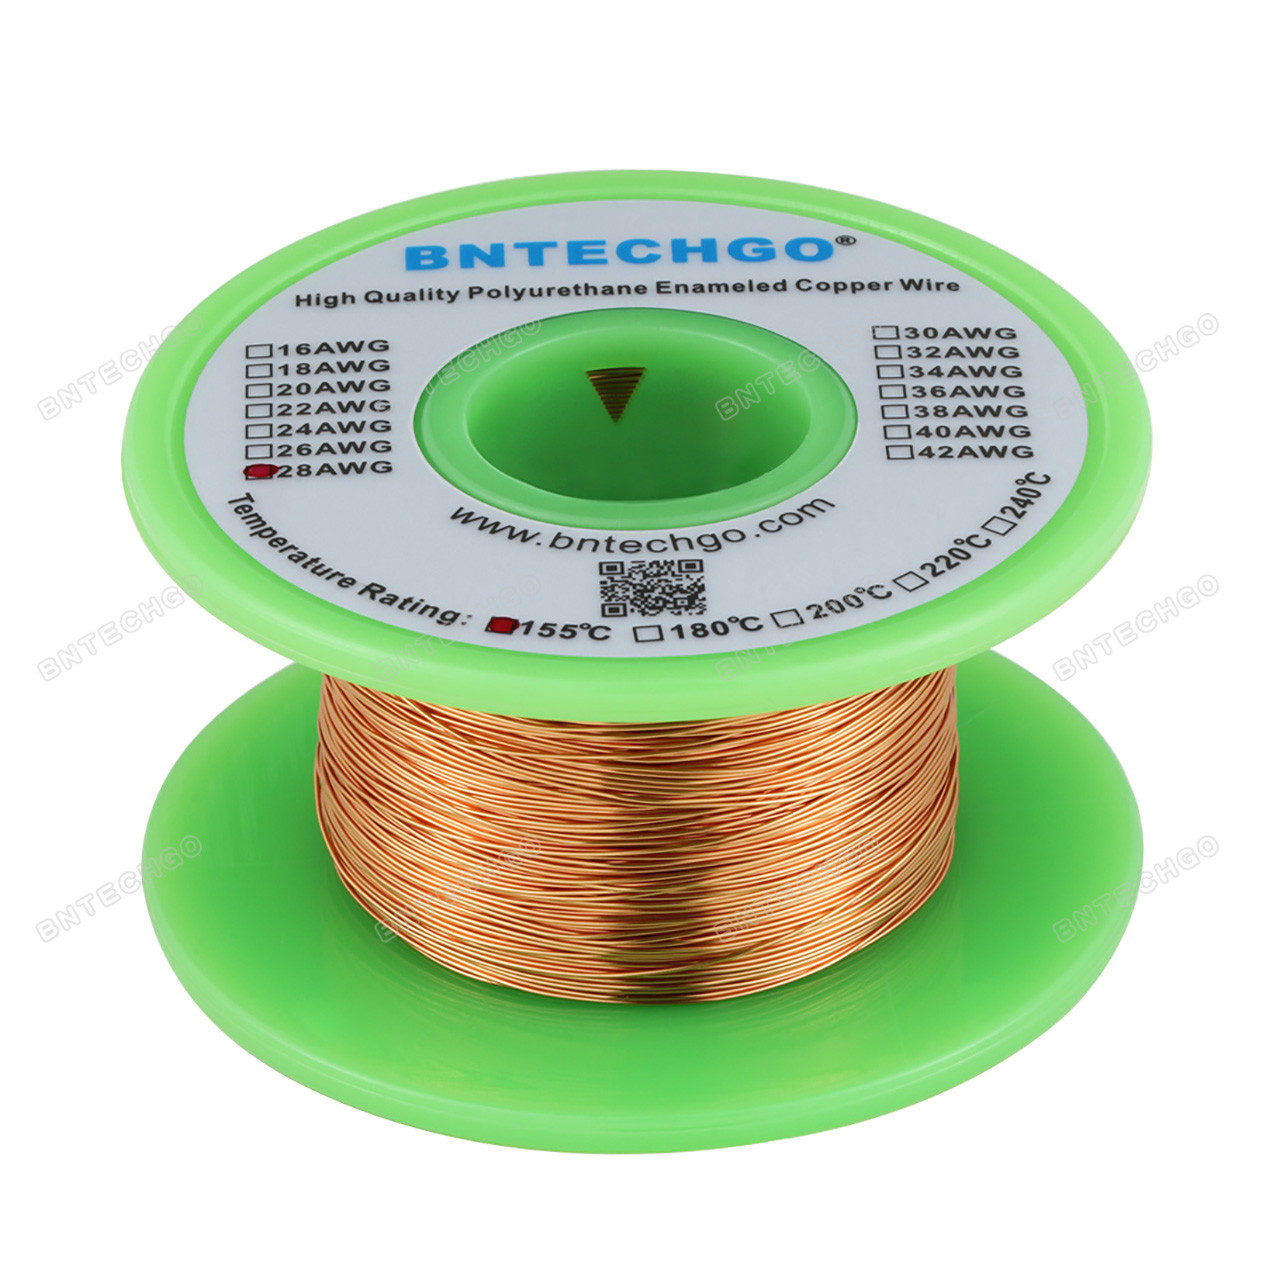 BNTECHGO 28 AWG Magnet Wire - Enameled Copper Wire - Enameled Magnet  Winding Wire - 1.0 lb - 0.0122 Diameter 1 Spool Coil Red Temperature  Rating 155